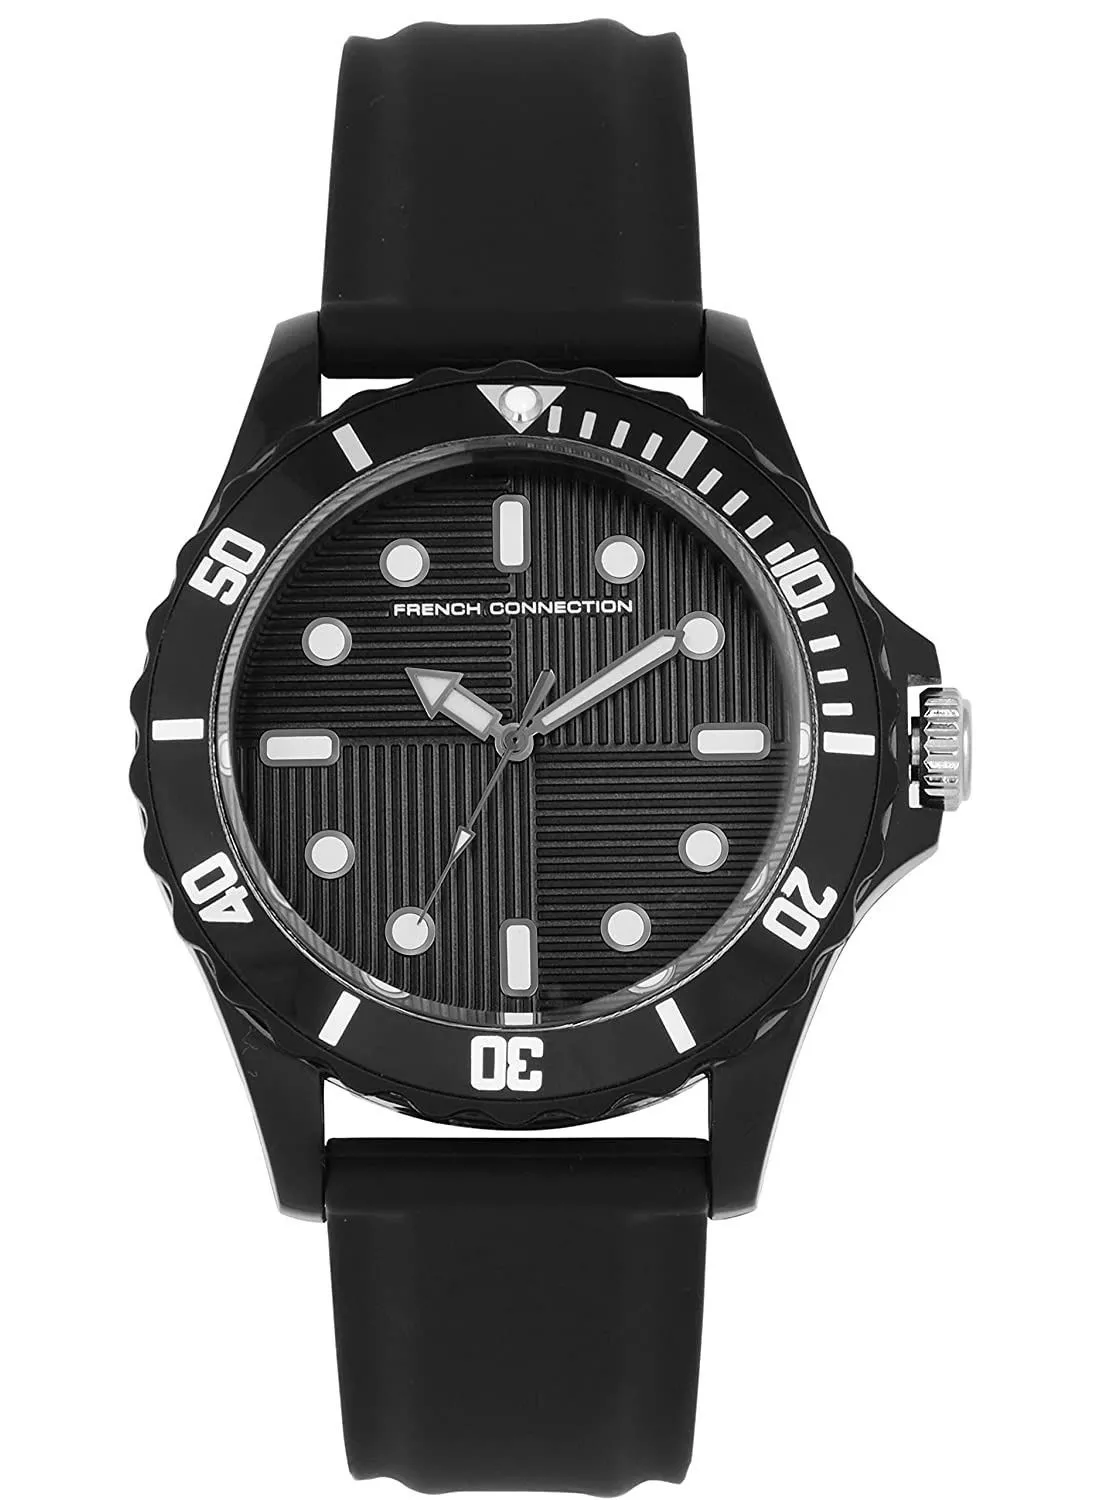 French Connection French Connection Analog Black Dial Unisex-Adult's Watch-30 mm - FC170B